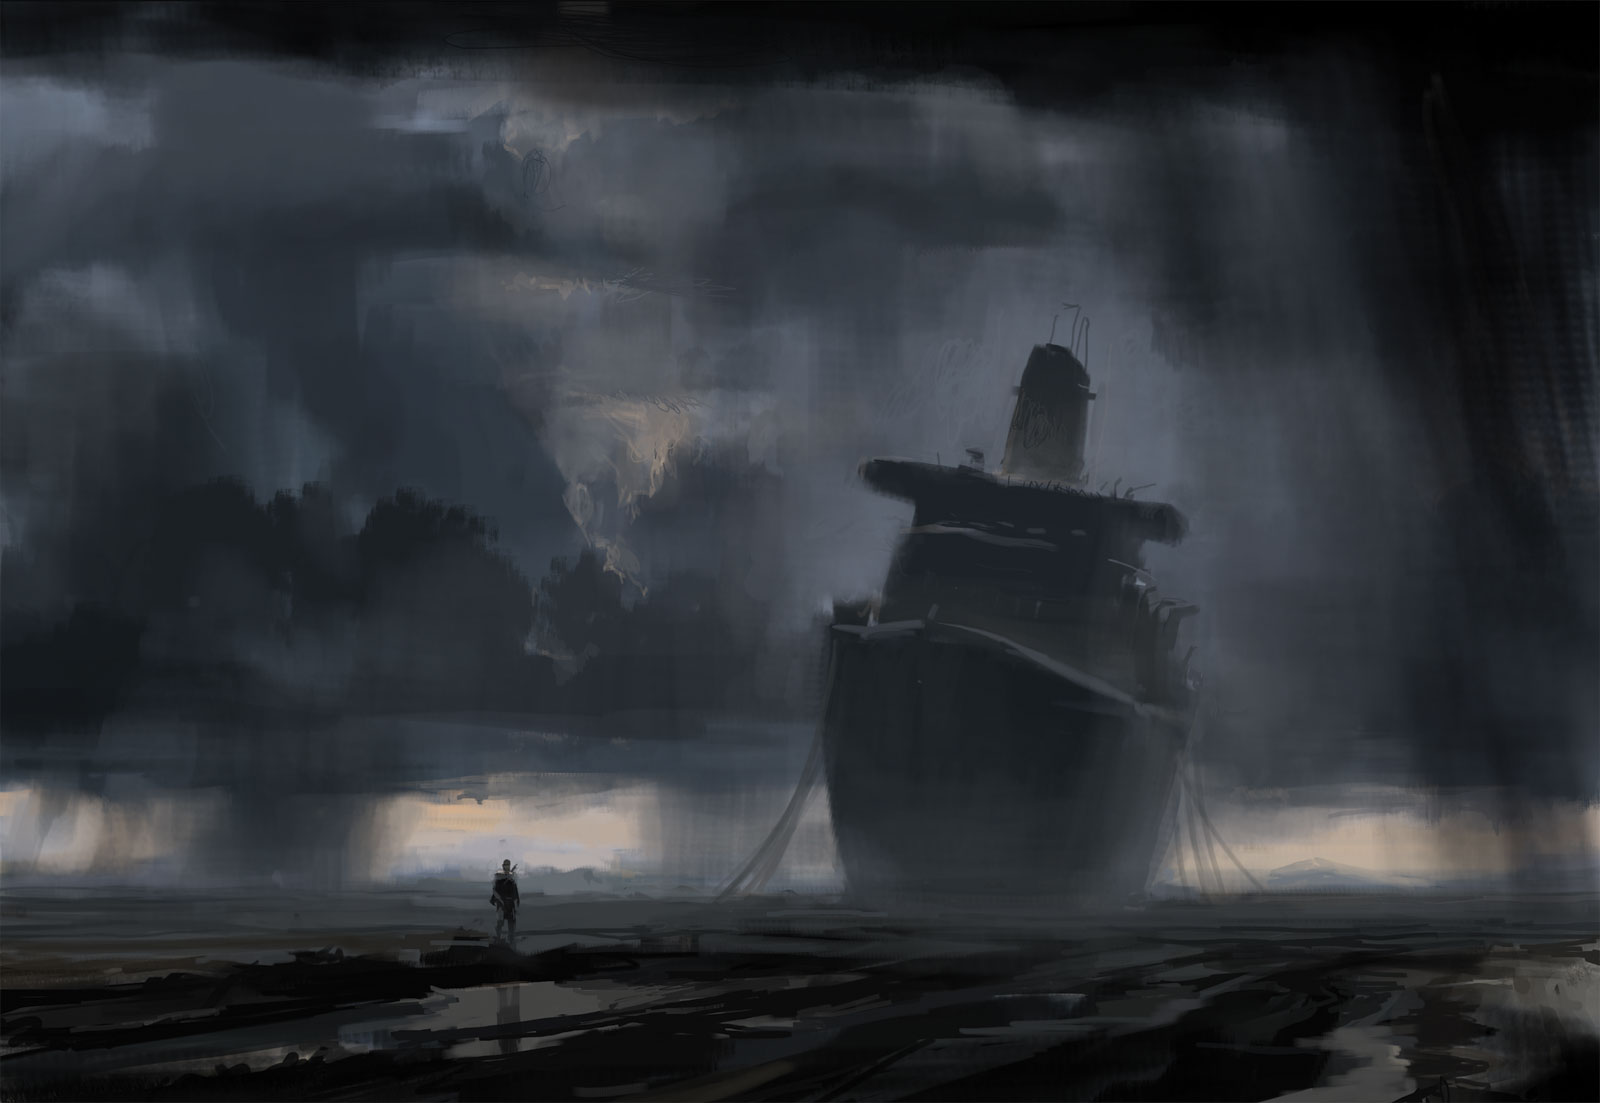 Free download abandoned ship stormy weather human HD Wallpaper of Art Fantasy [1600x1103] for your Desktop, Mobile & Tablet. Explore Stormy Weather Wallpaper. Stormy Wallpaper, Stormy Skies Wallpaper, Stormy Beach Wallpaper